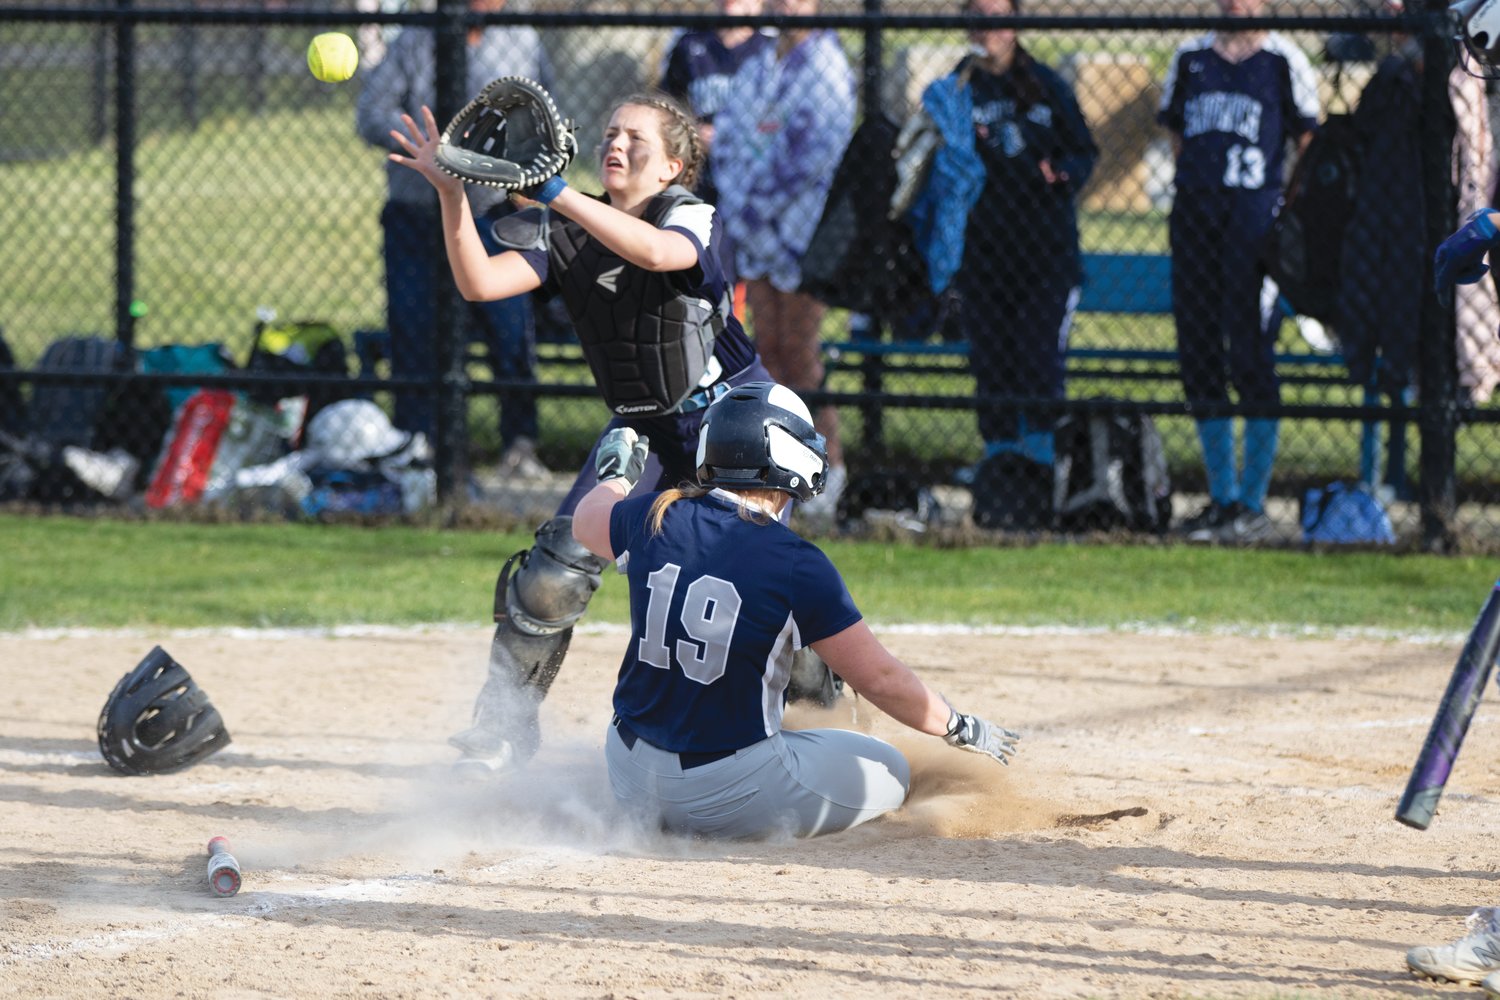 Melanie Bamber slides into home ahead of the throw.